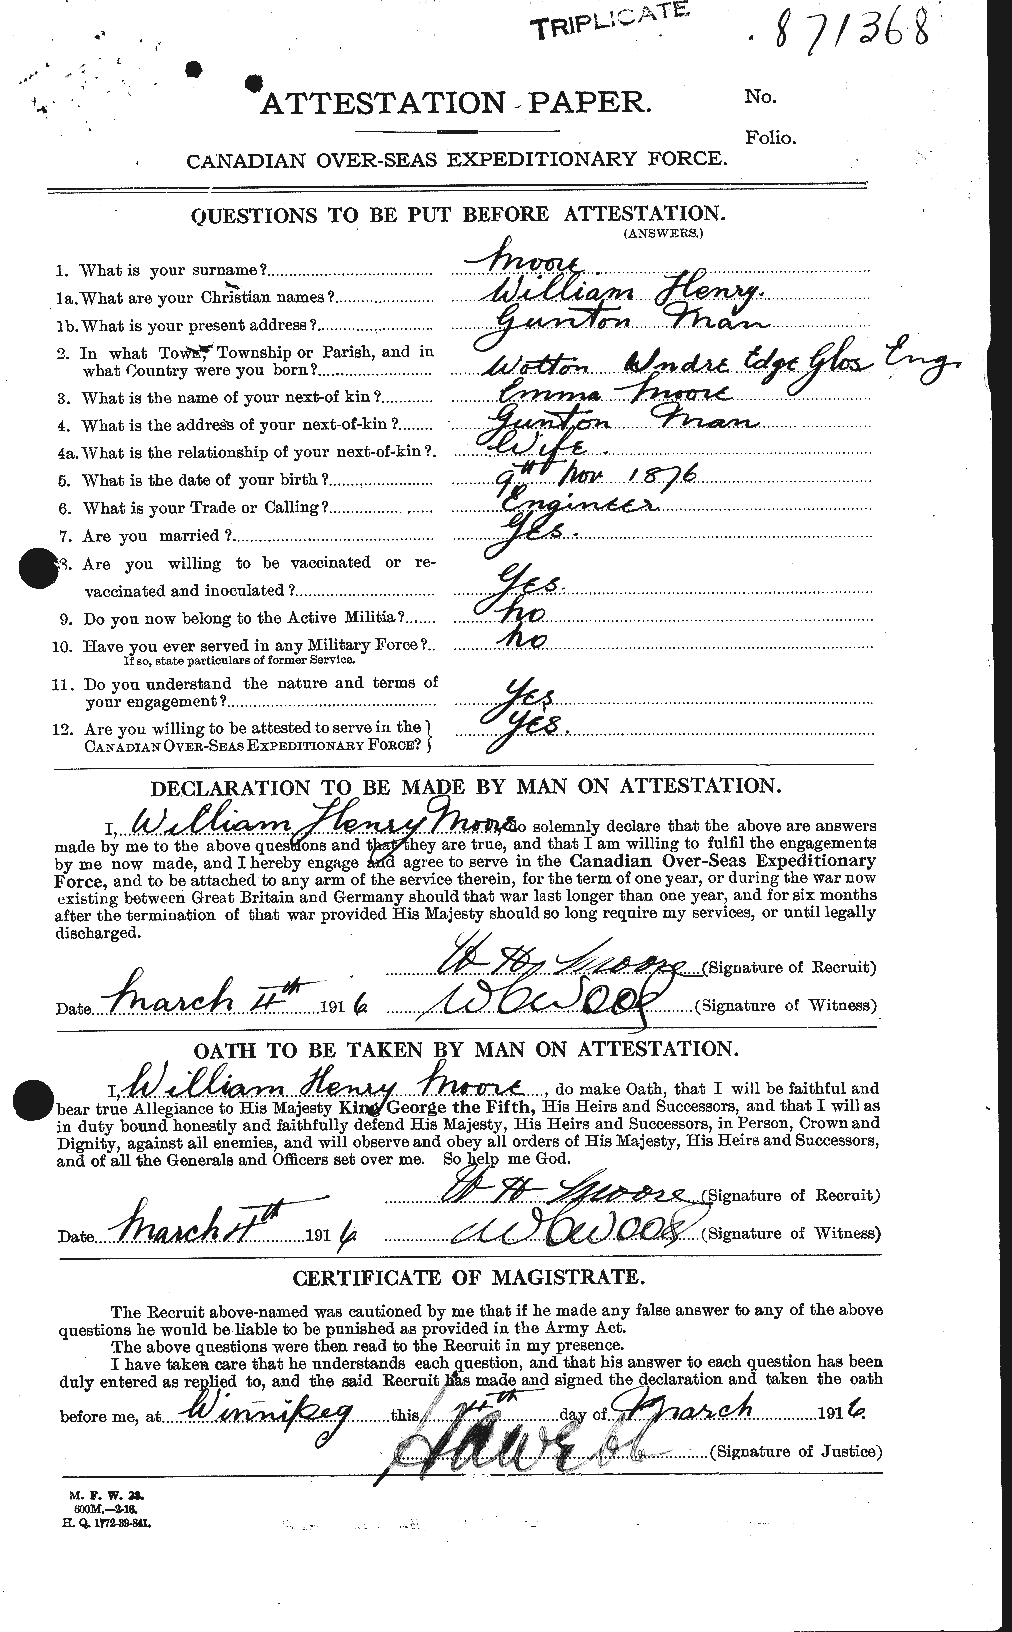 Personnel Records of the First World War - CEF 505820a